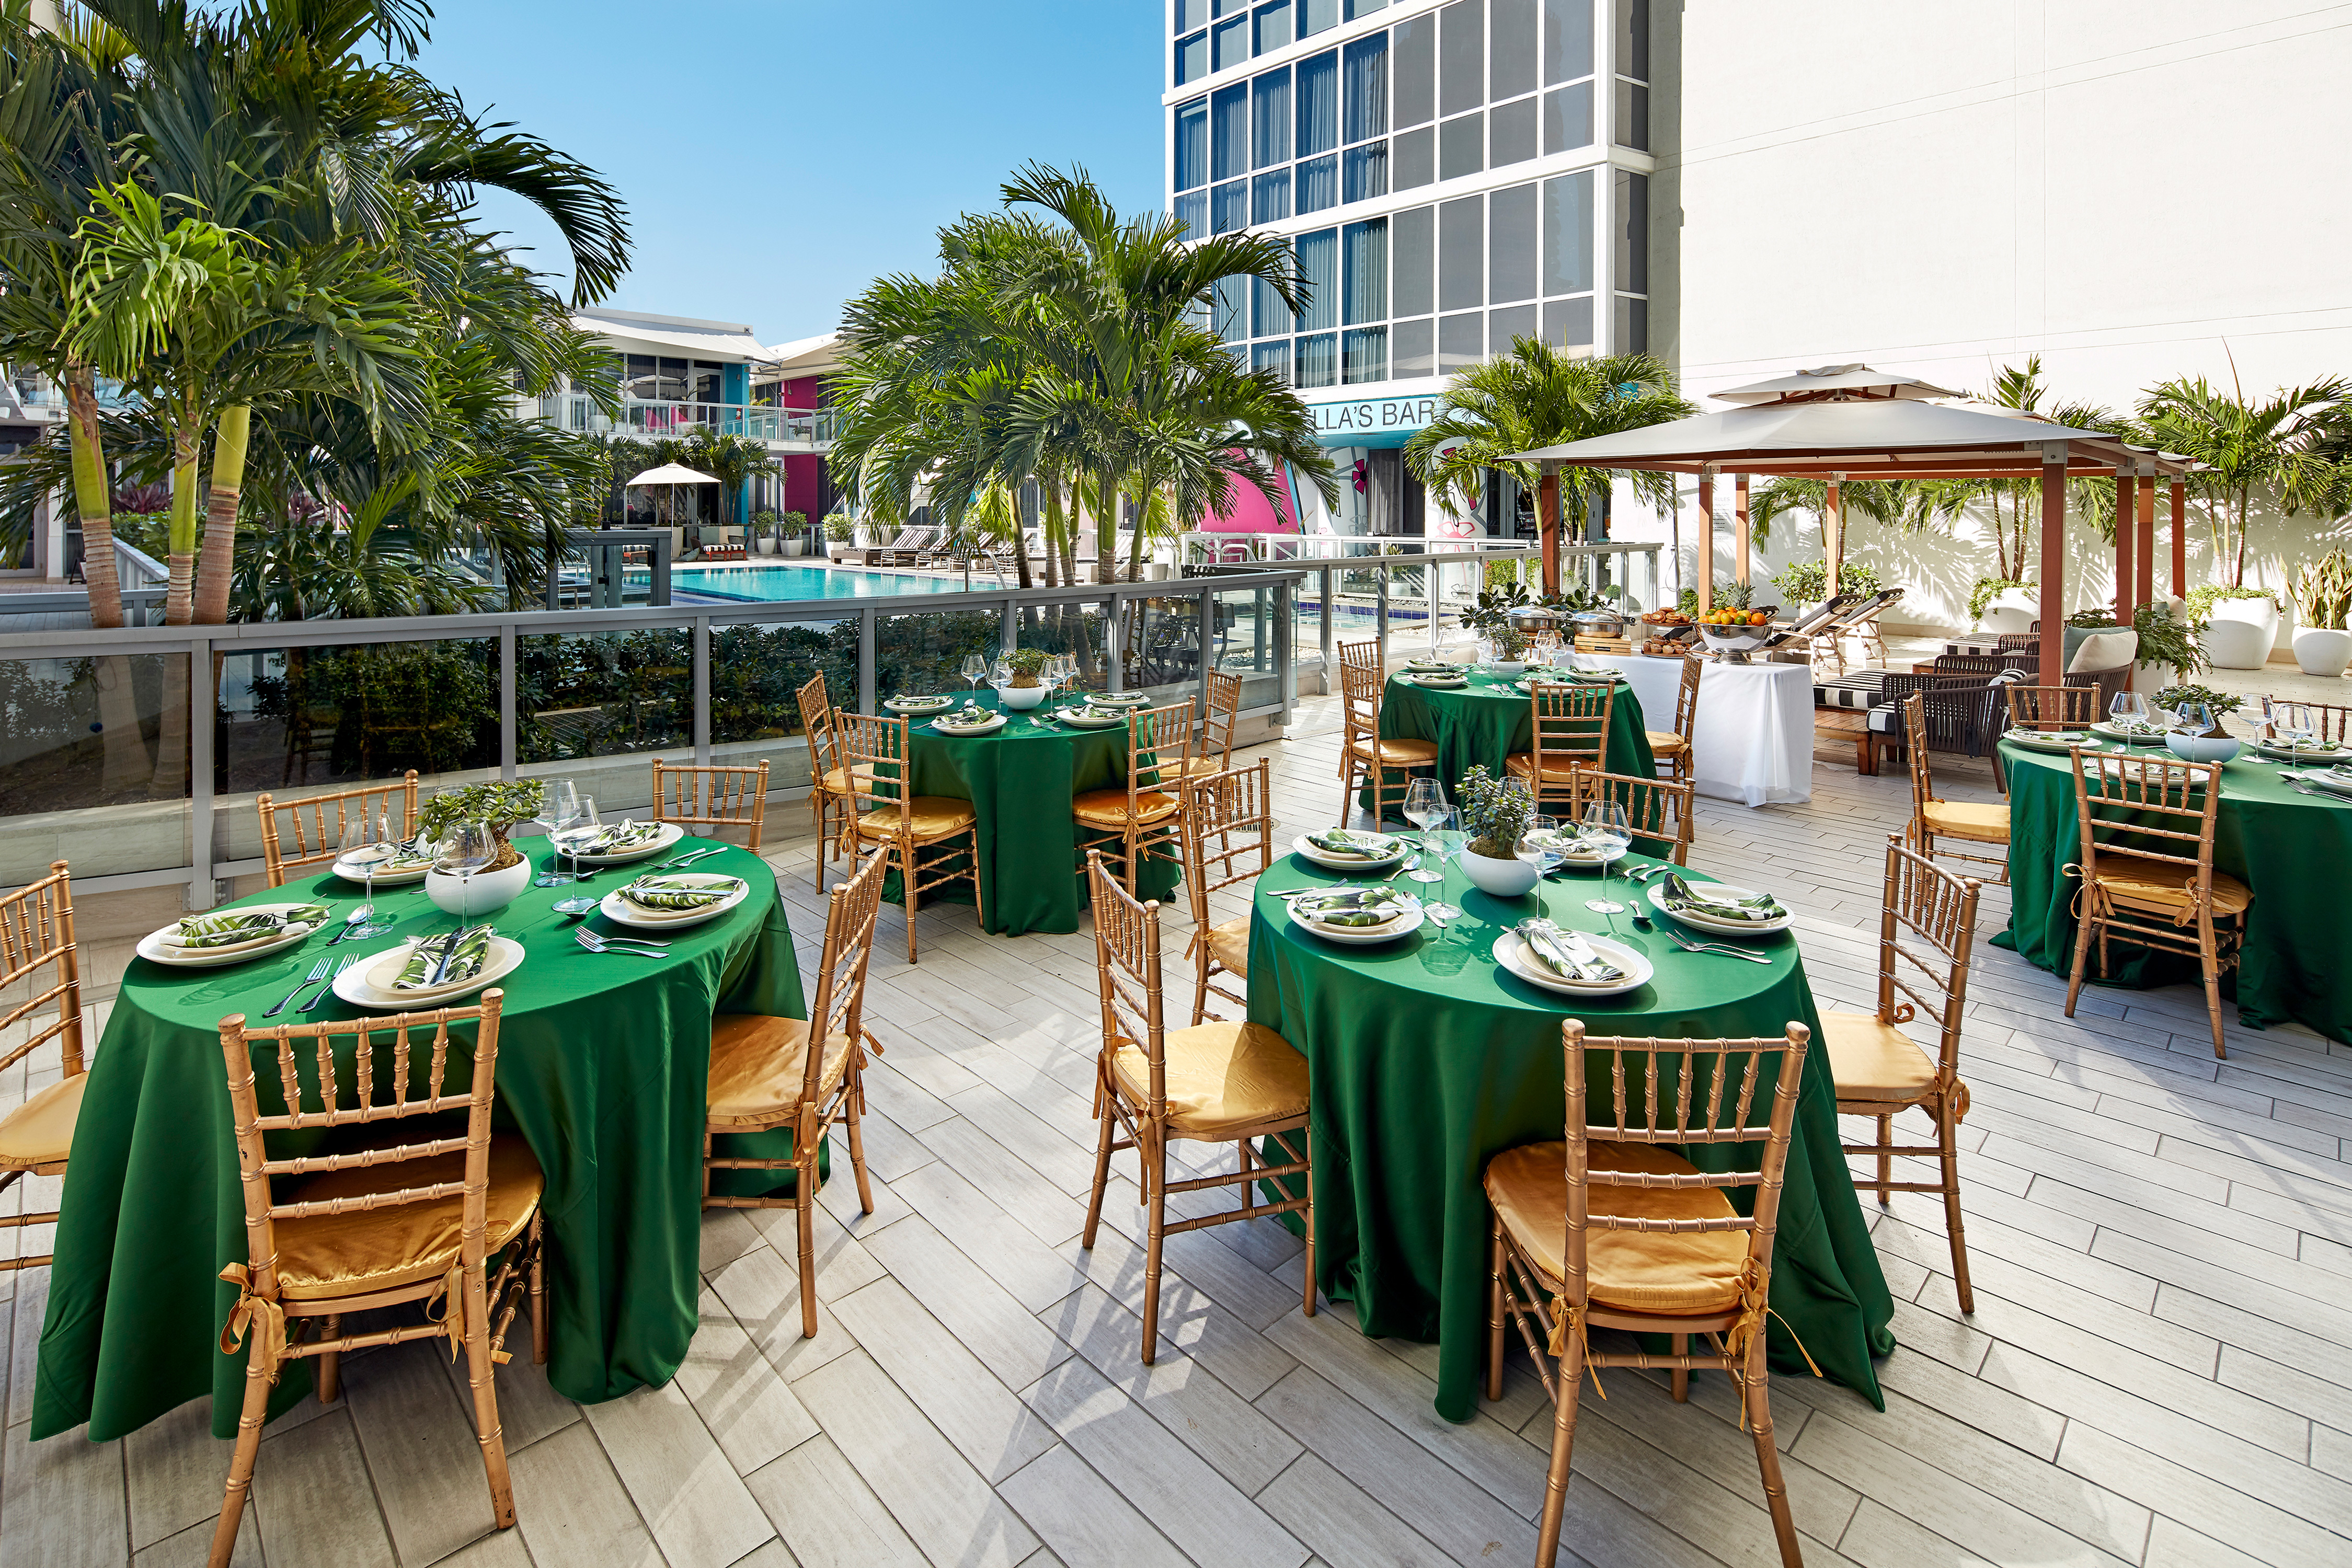 Exterior Poolside Dining Area with Round Banquet Tables and Chairs